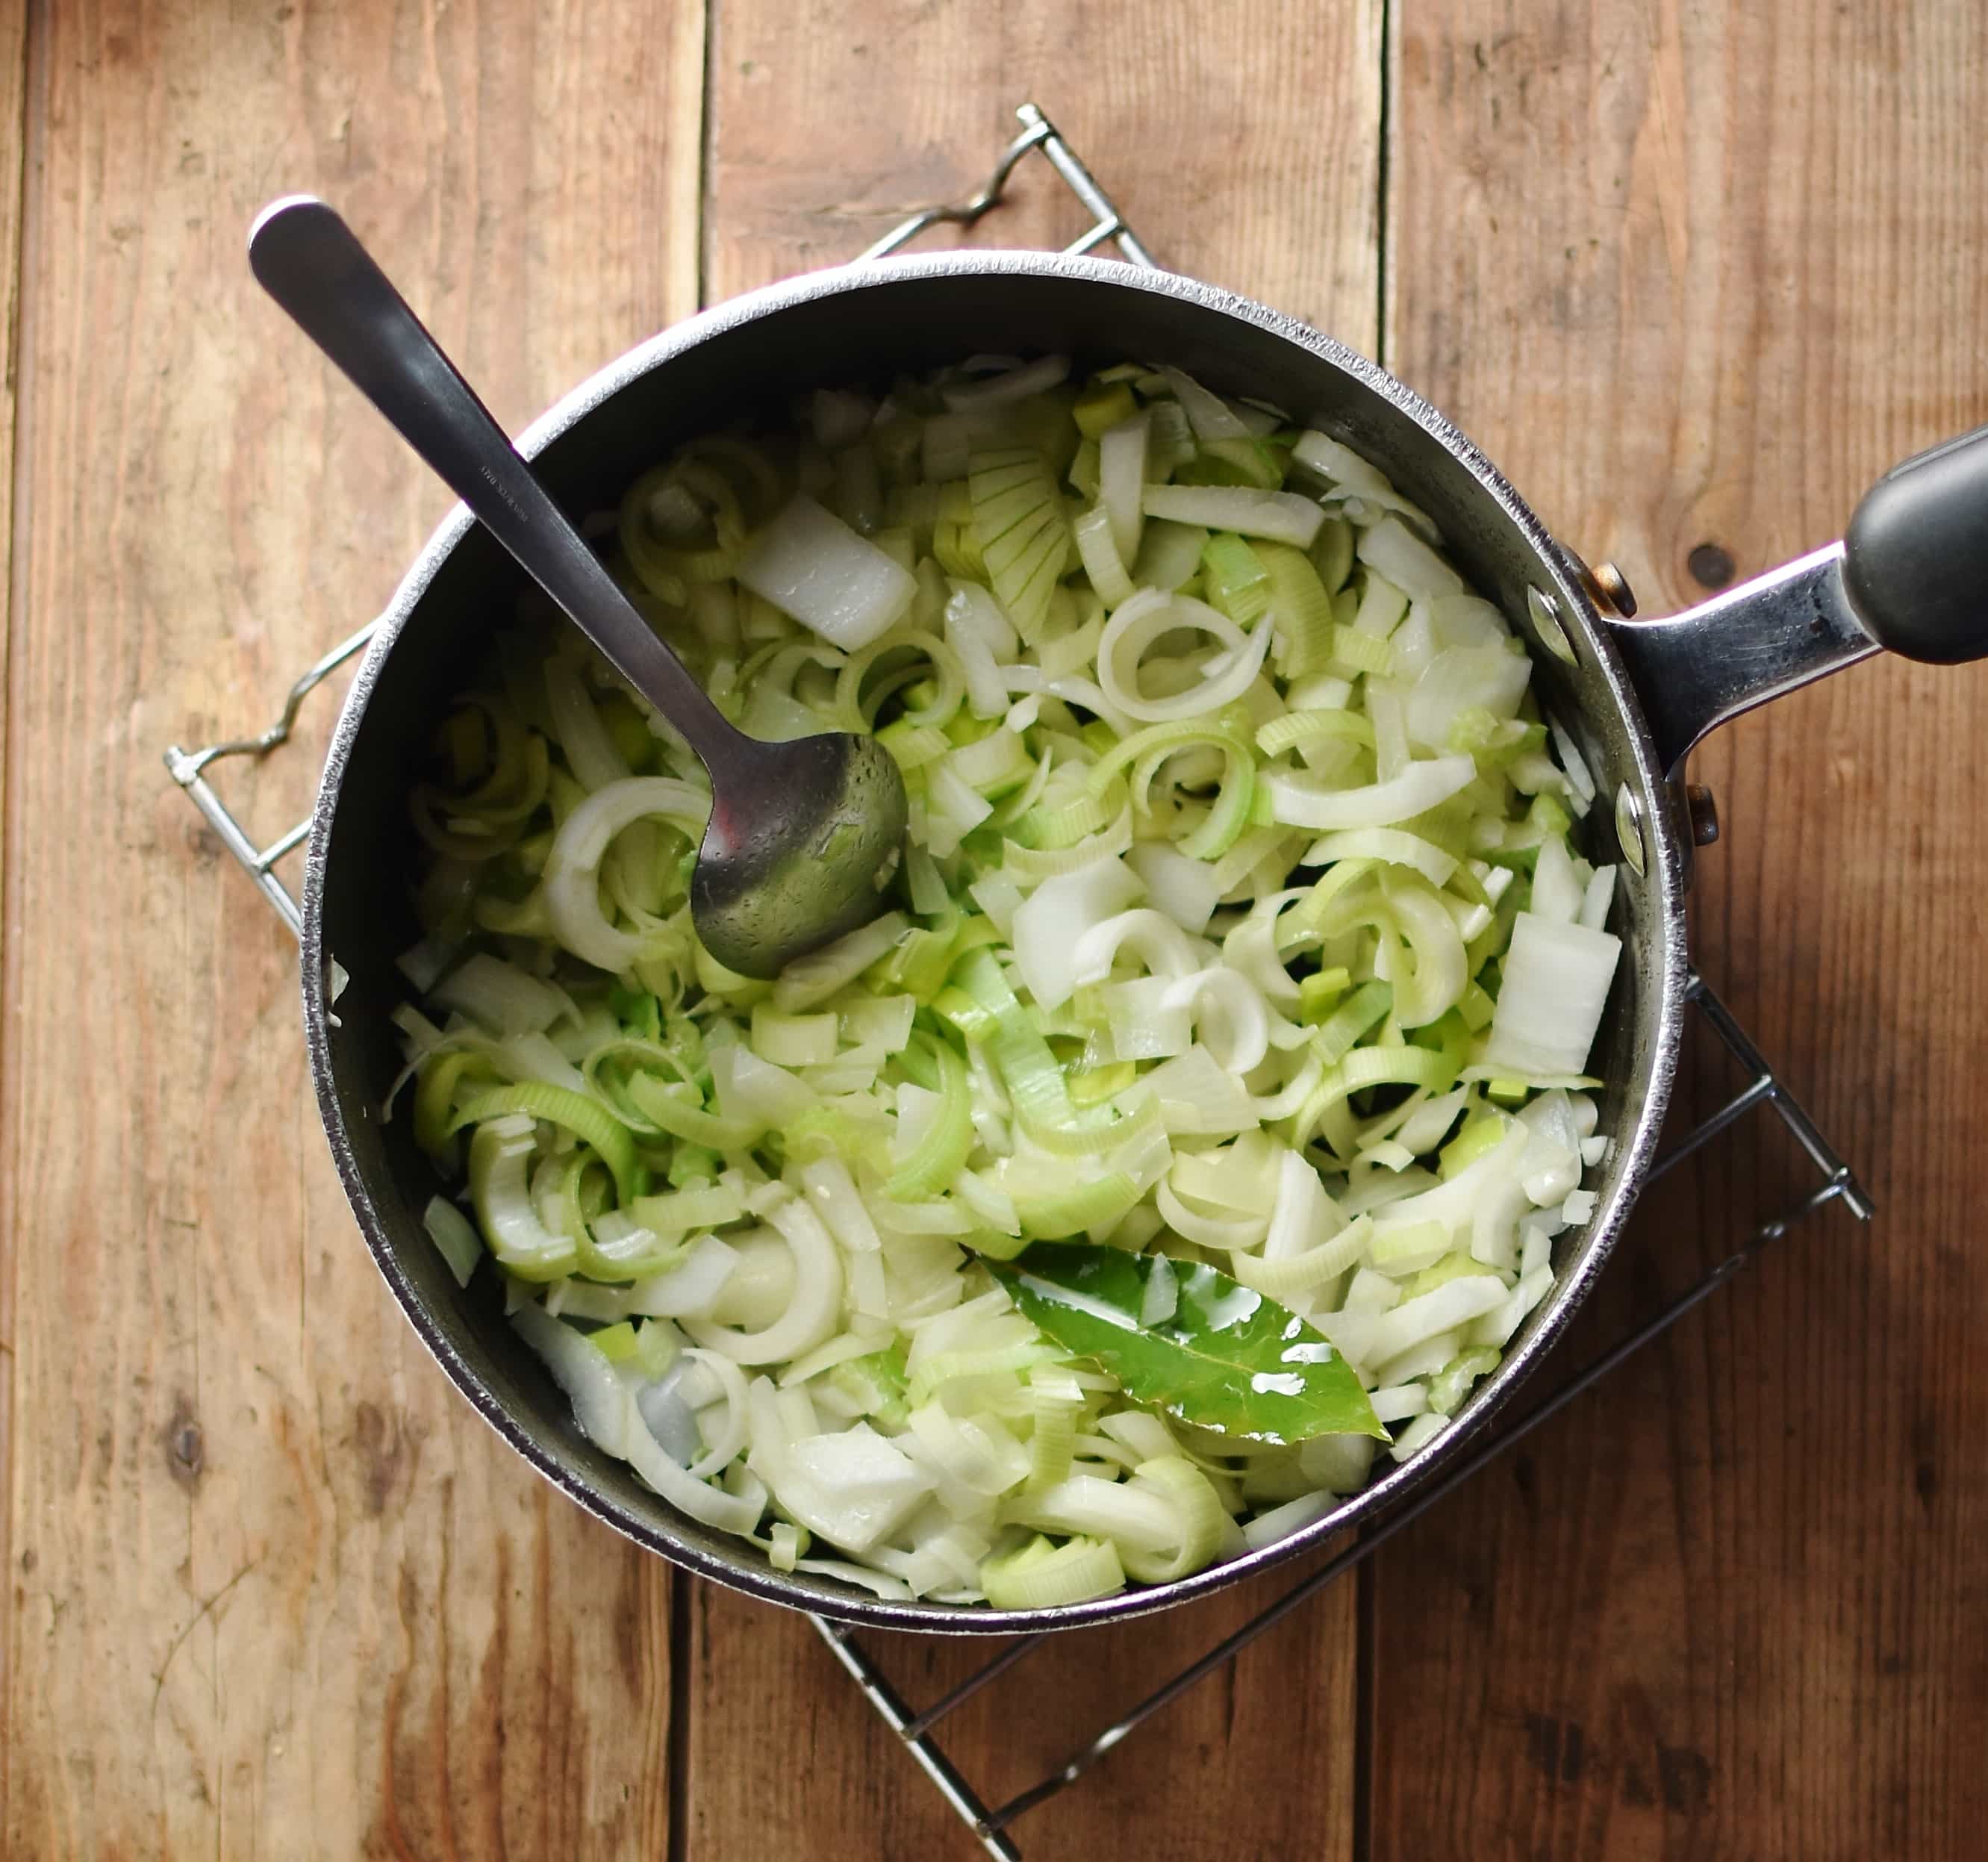 Chopped vegetables with spoon inside large pot.